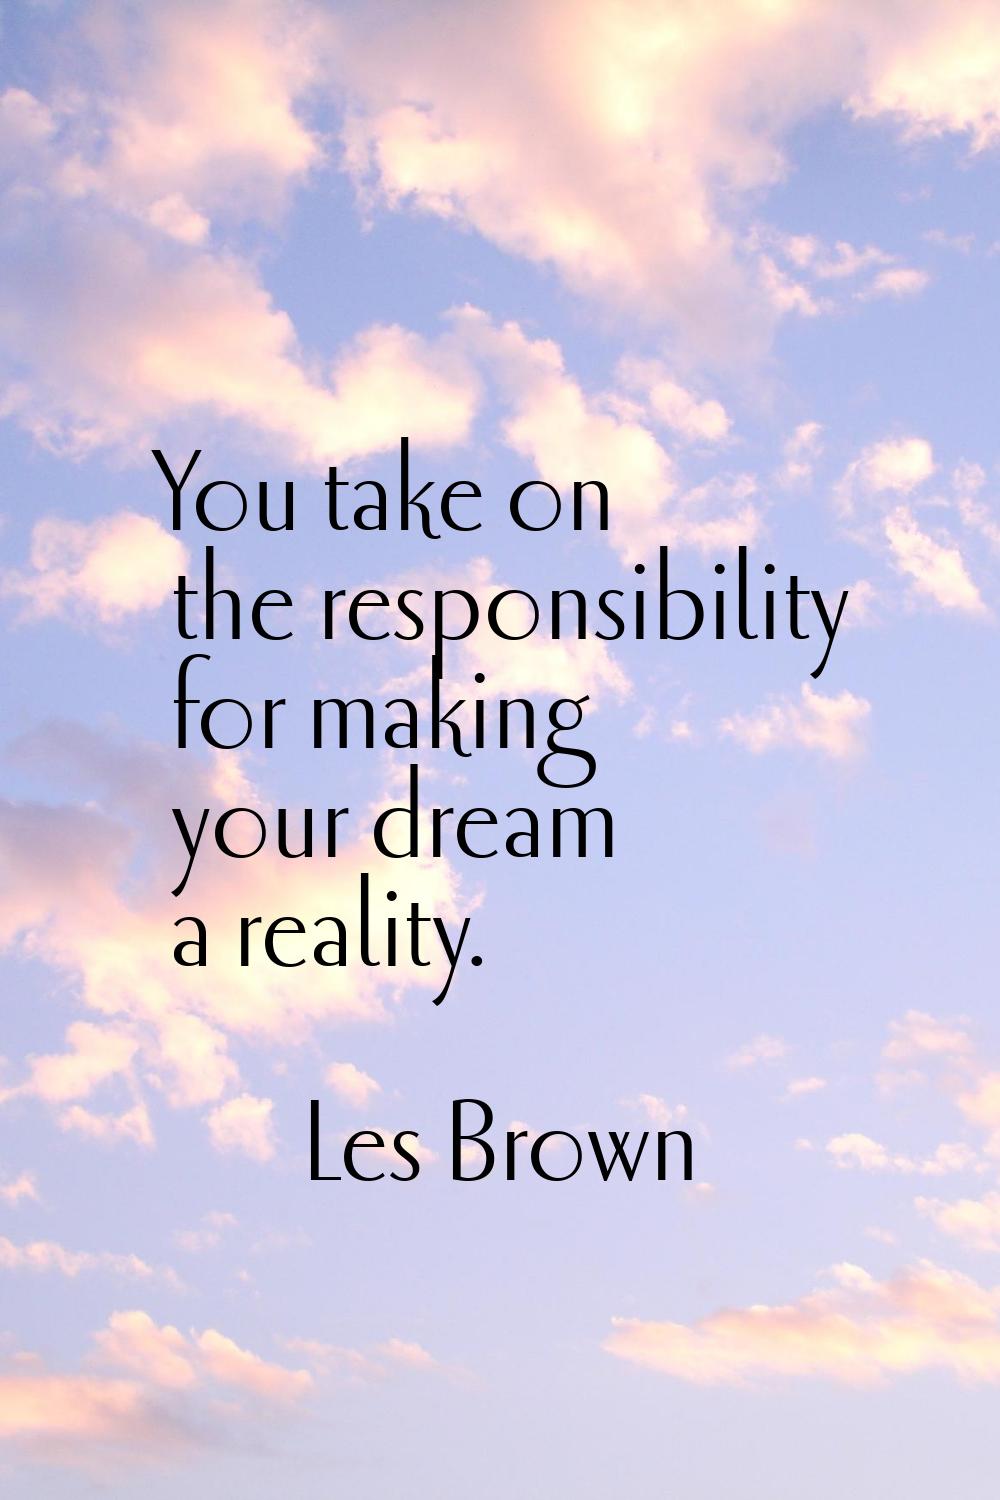 You take on the responsibility for making your dream a reality.